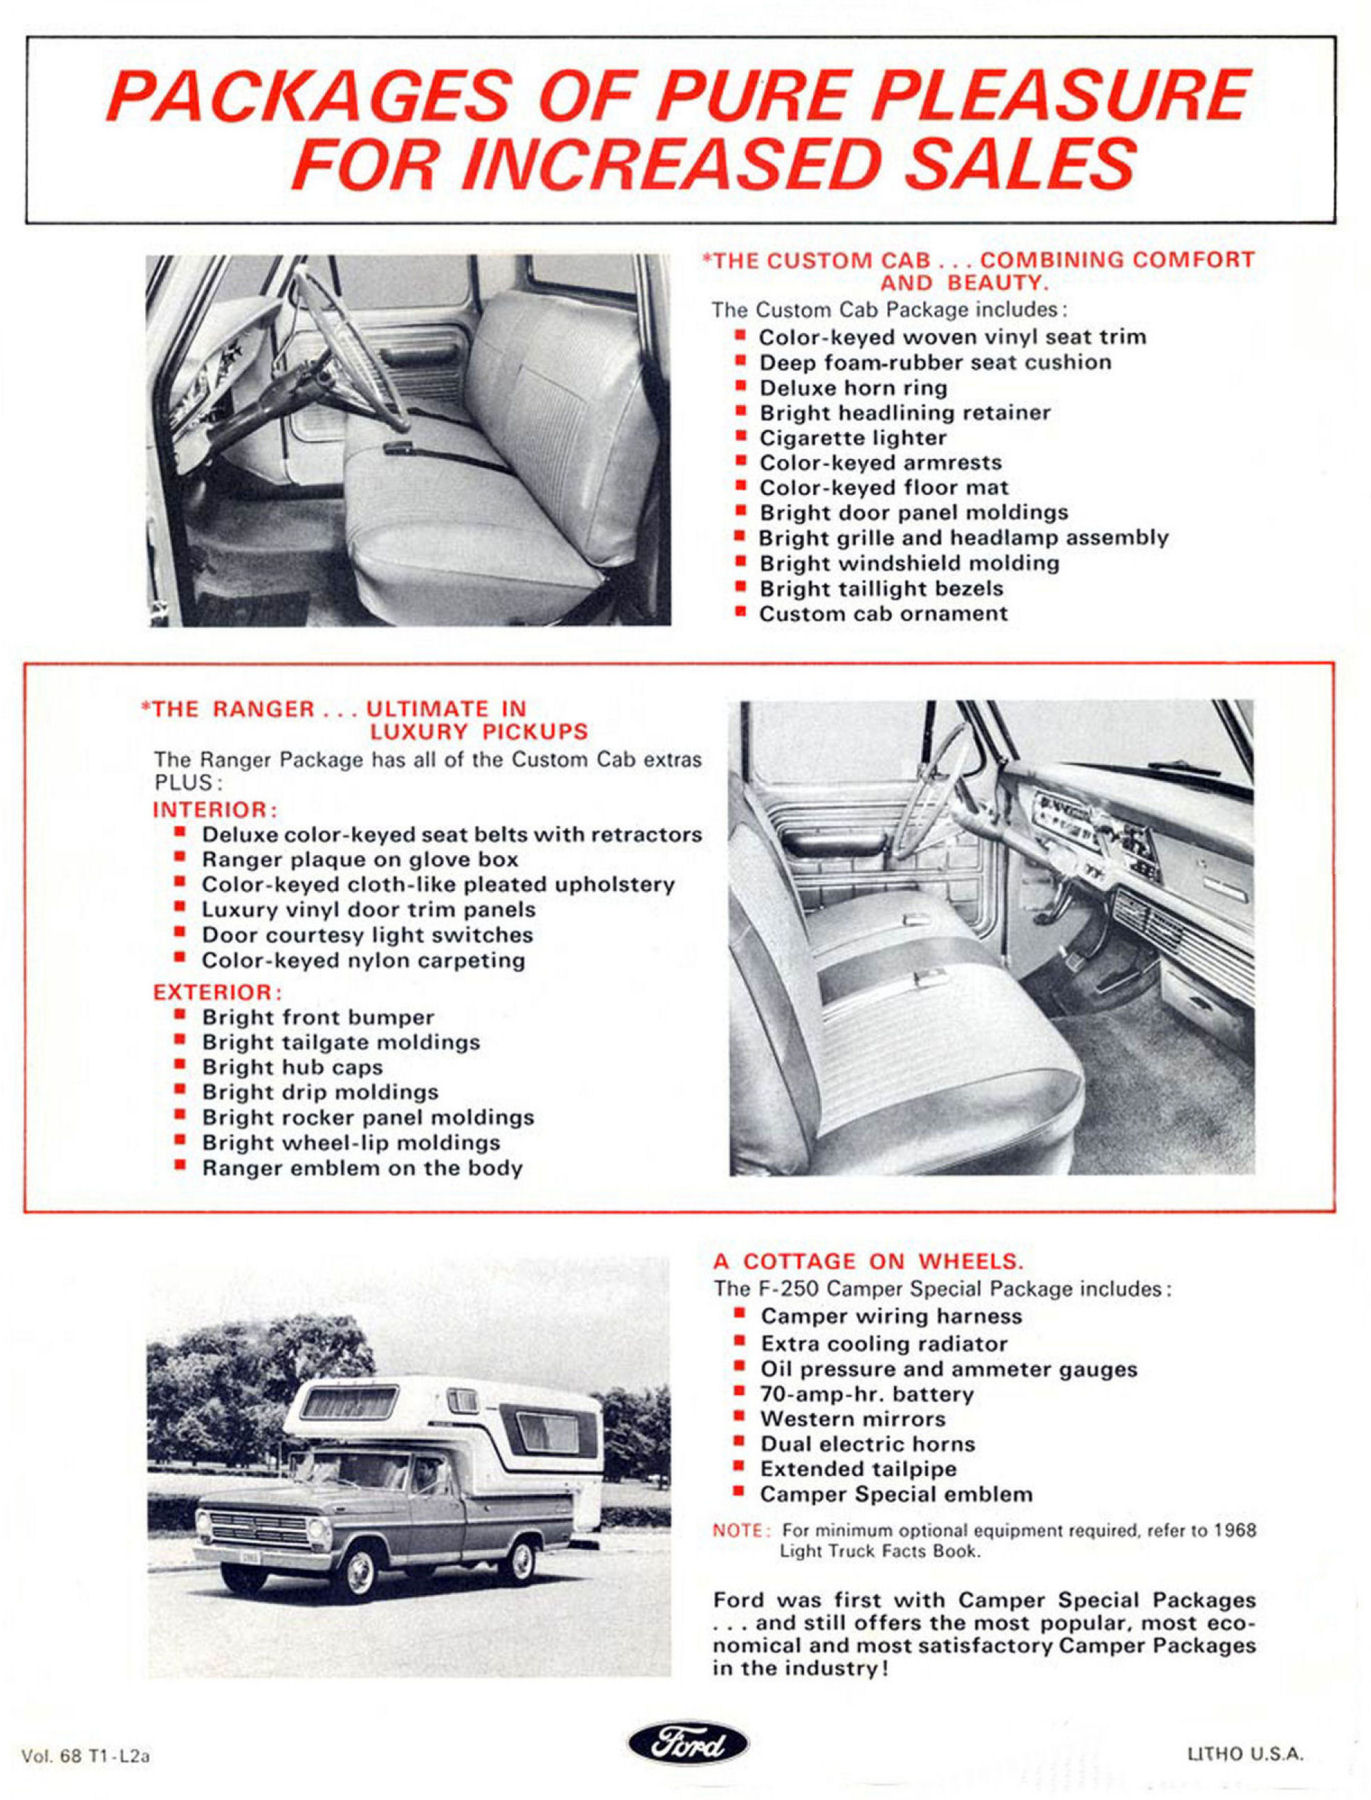 1968 Ford F-250 Sales Features-04